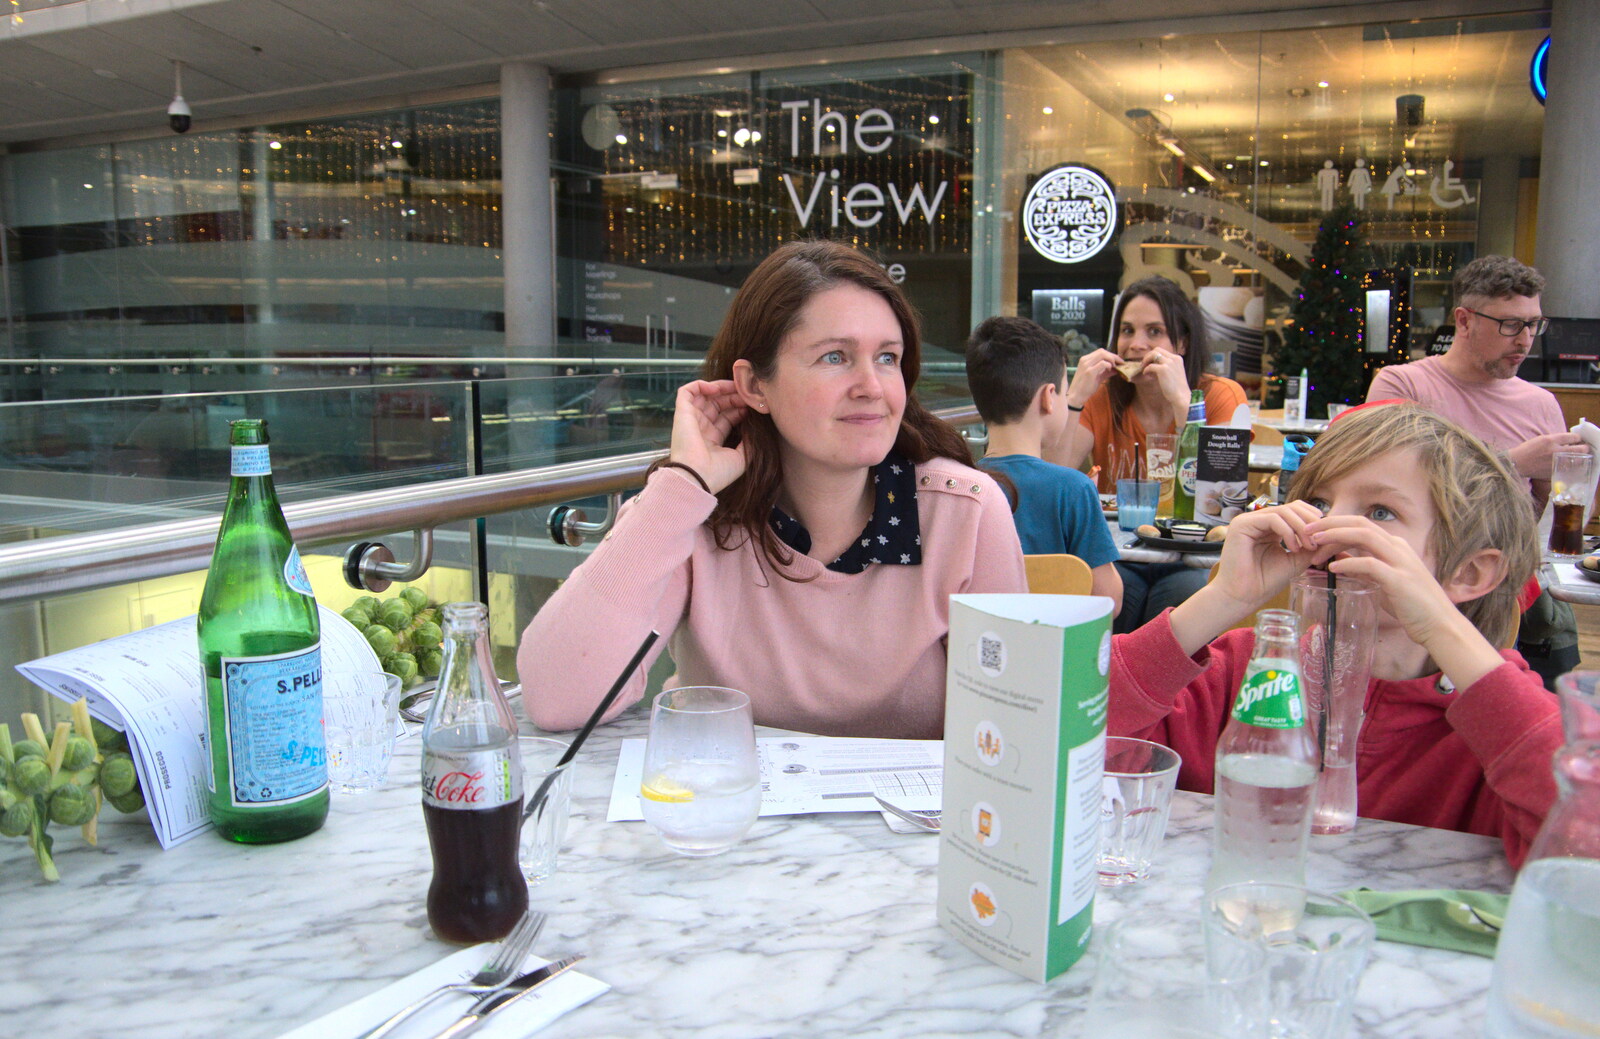 Isobel and Harry in Pizza Express from A Bit of Christmas Shopping, Norwich, Norfolk - 23rd December 2020